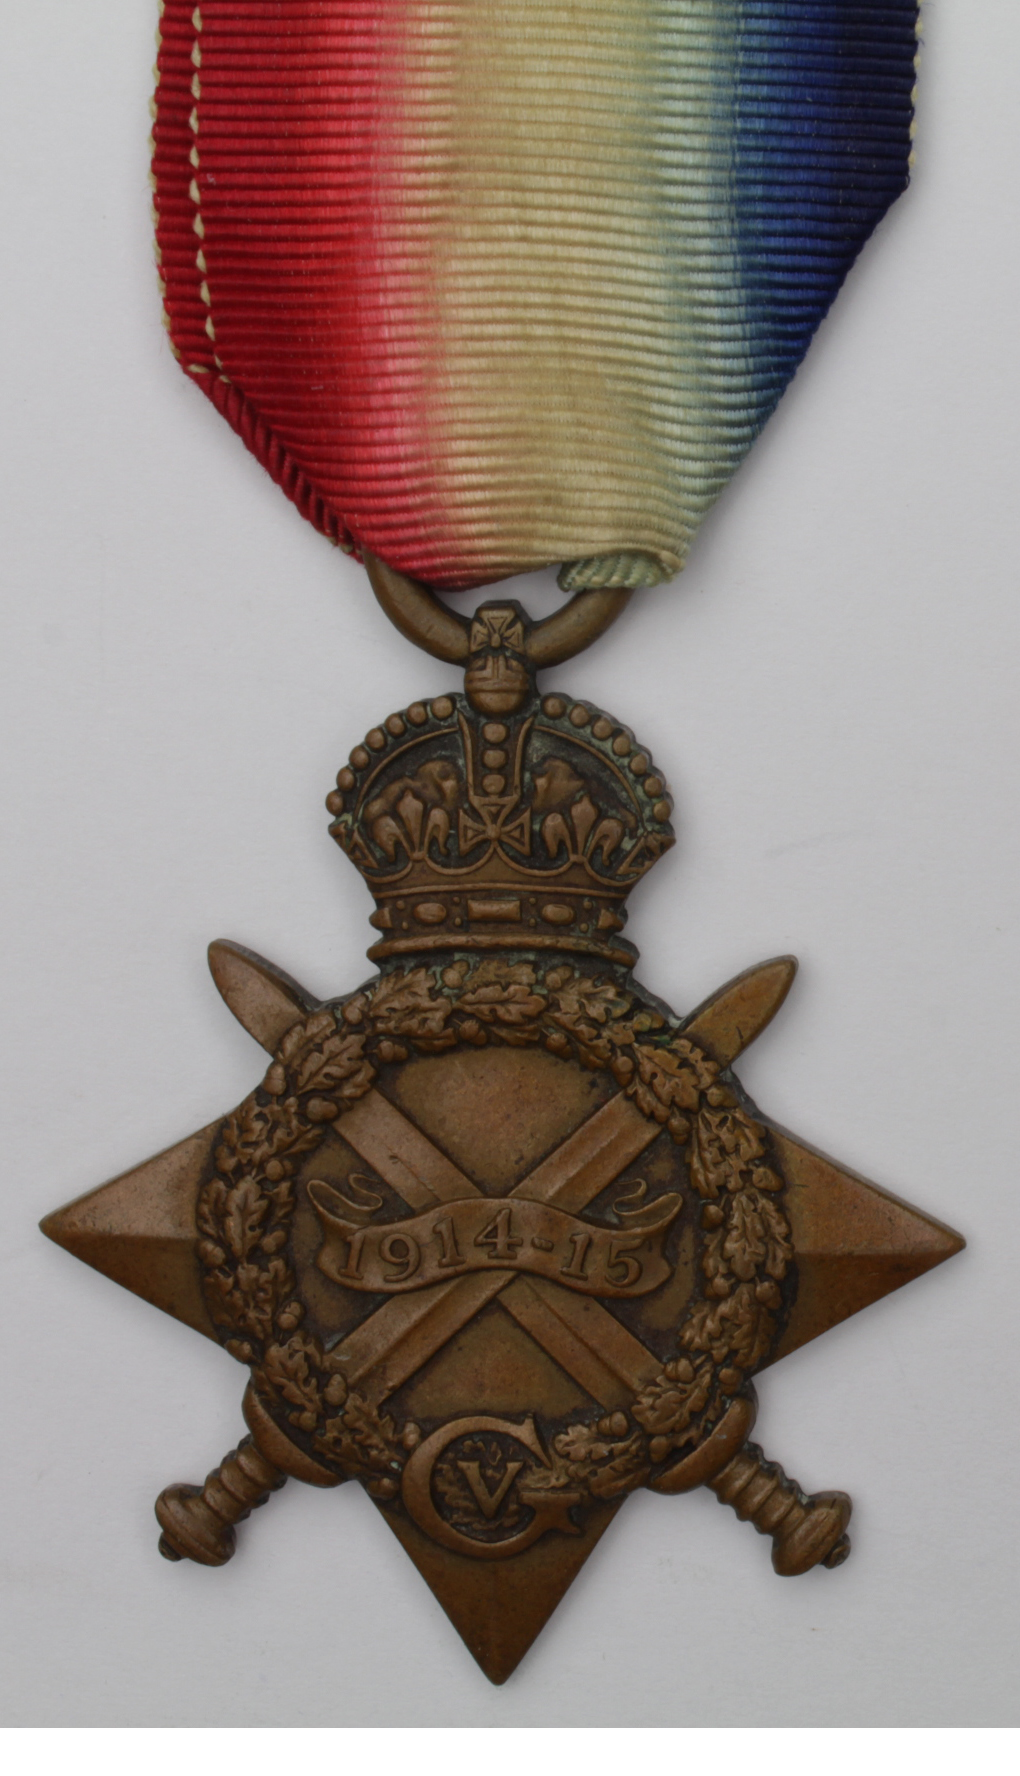 1915 Star to 17453 Pte J Bartley North'D Fus. Served with the 8th bn. Lived Southwick,